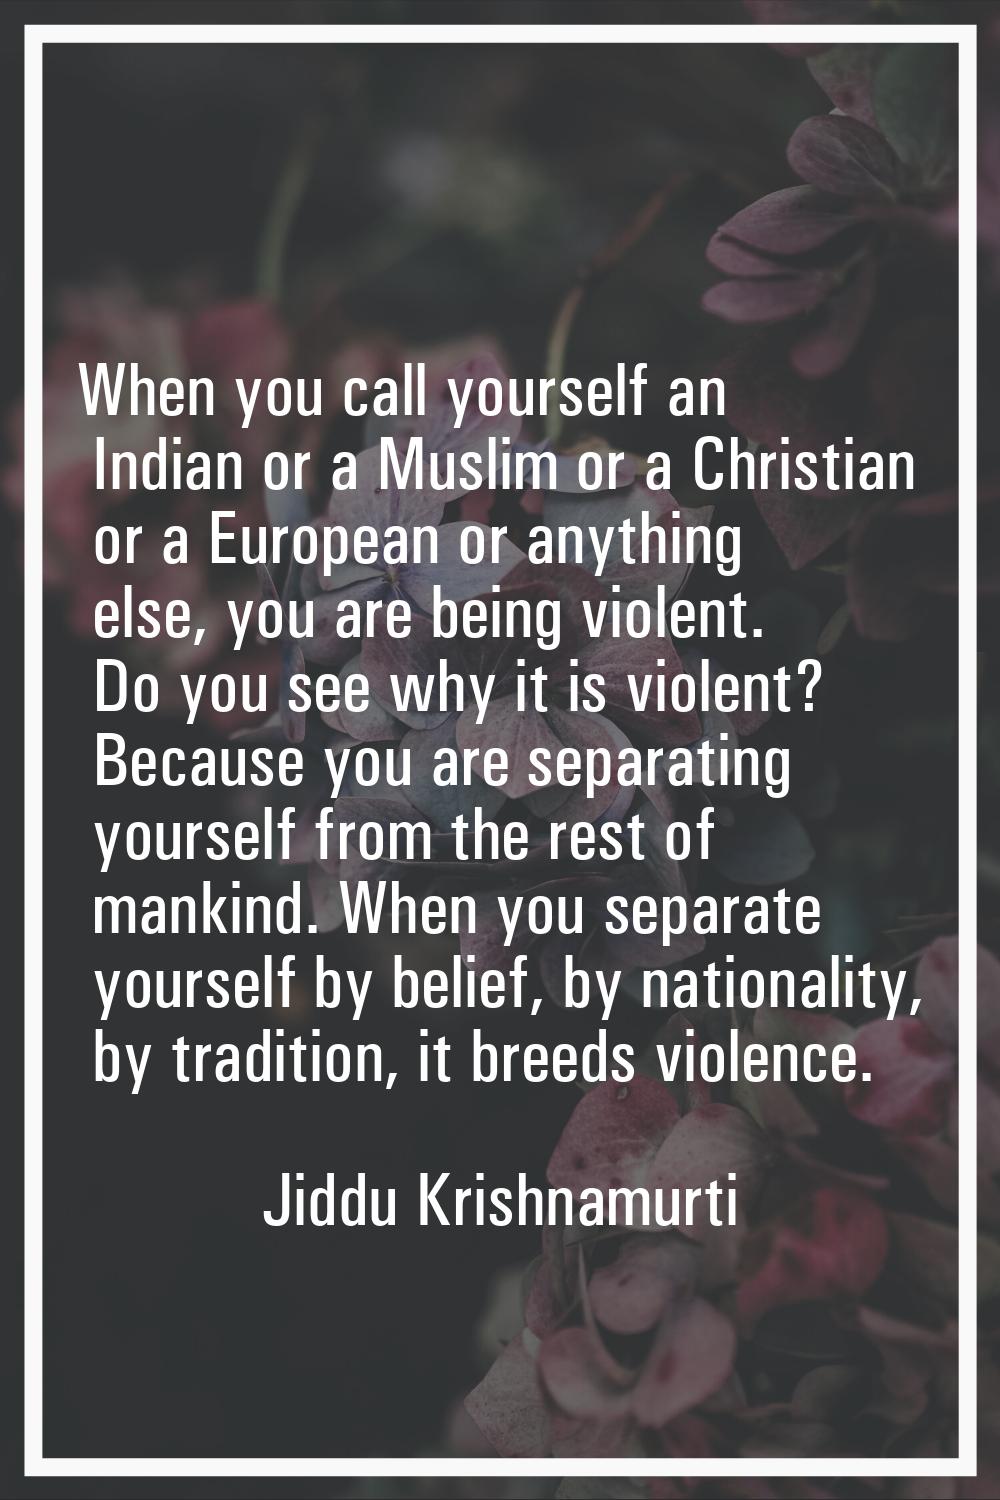 When you call yourself an Indian or a Muslim or a Christian or a European or anything else, you are